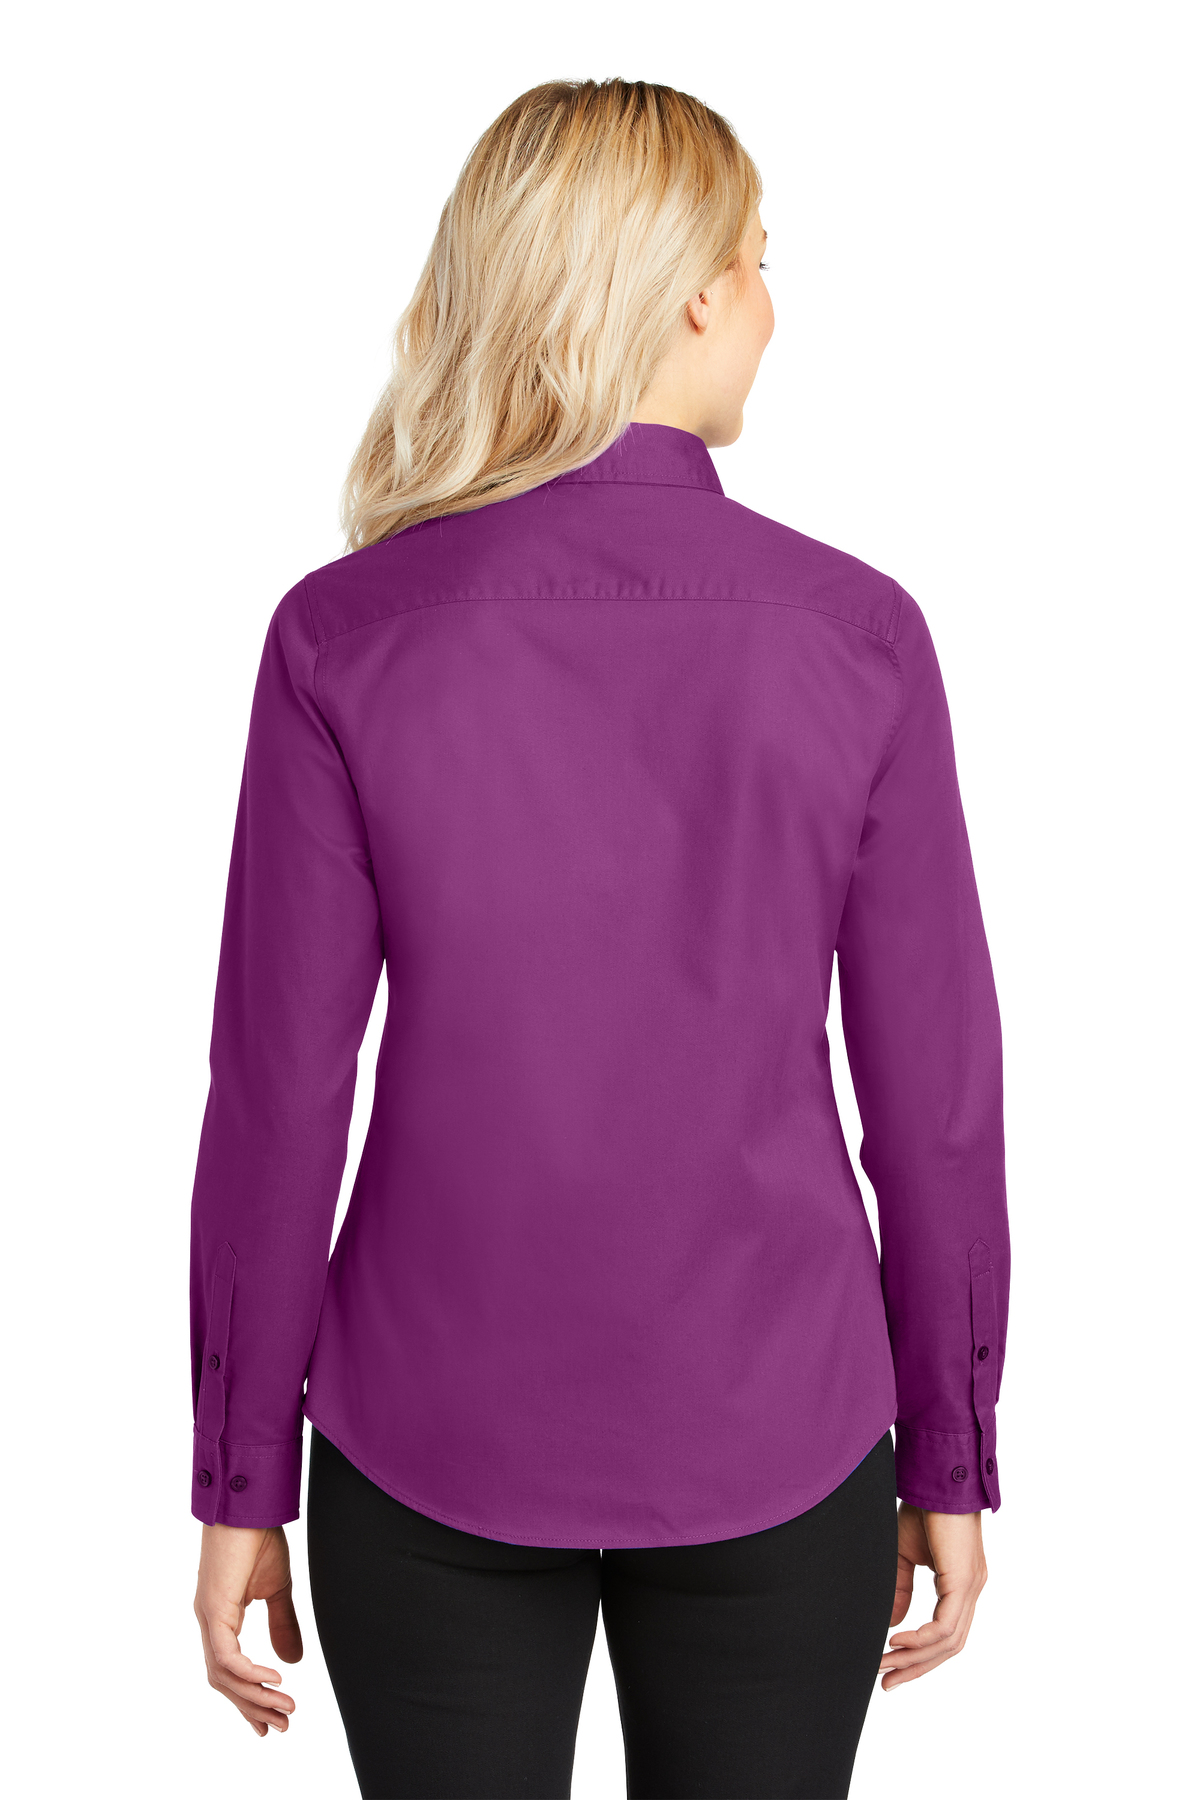 Port Authority Ladies Long Sleeve Easy Care Shirt | Product | Port Authority